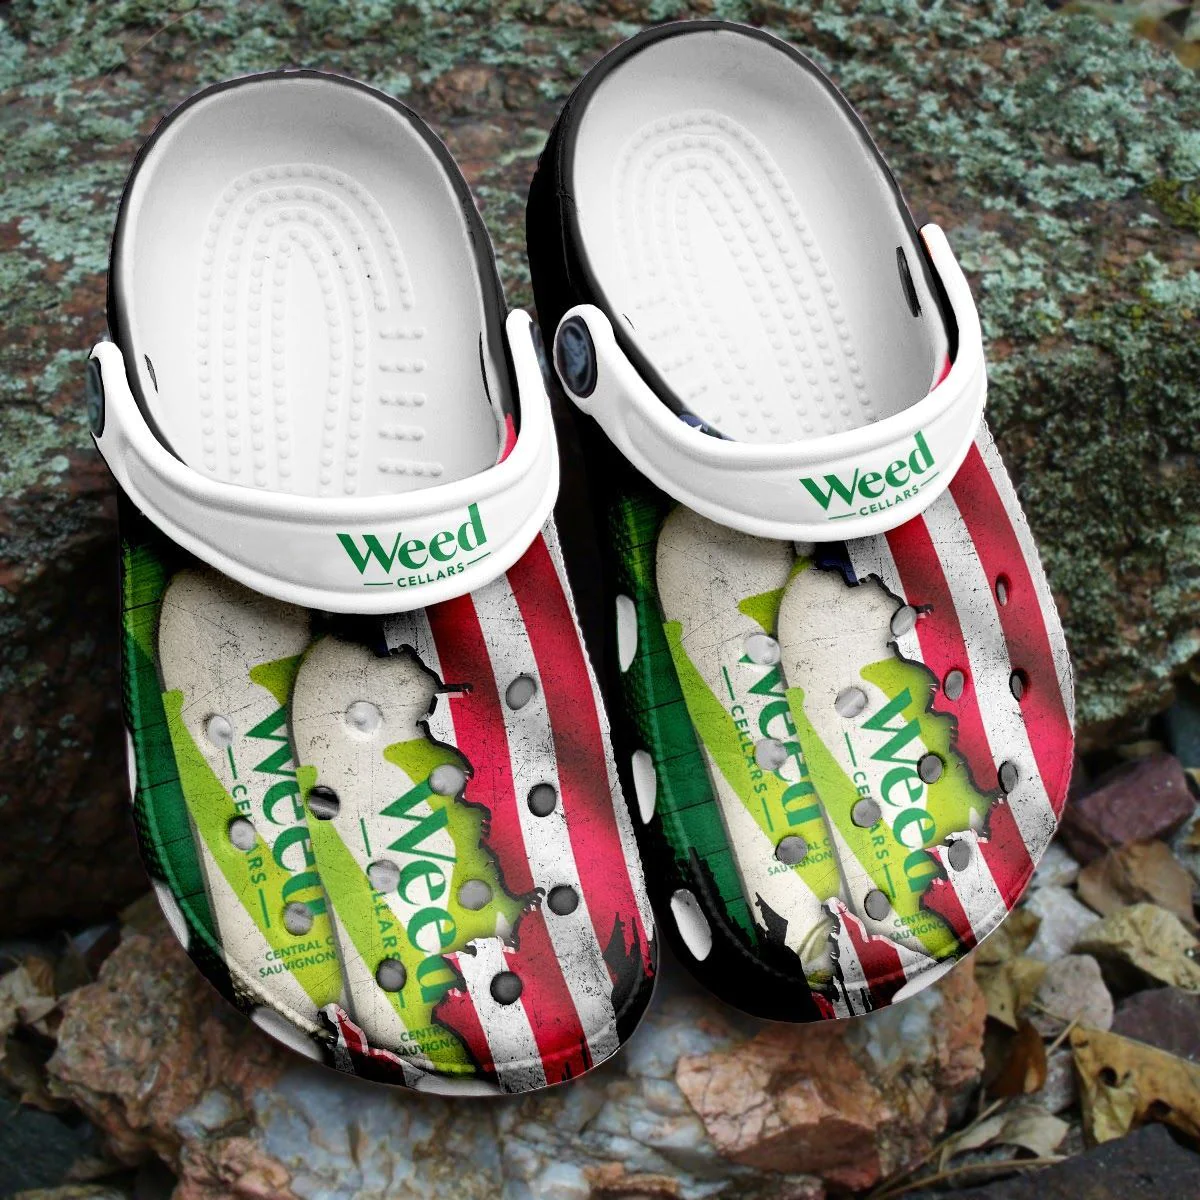 Weed Crocs Comfortable Clogs Crocband Shoes For Men Women | Limo Shoes